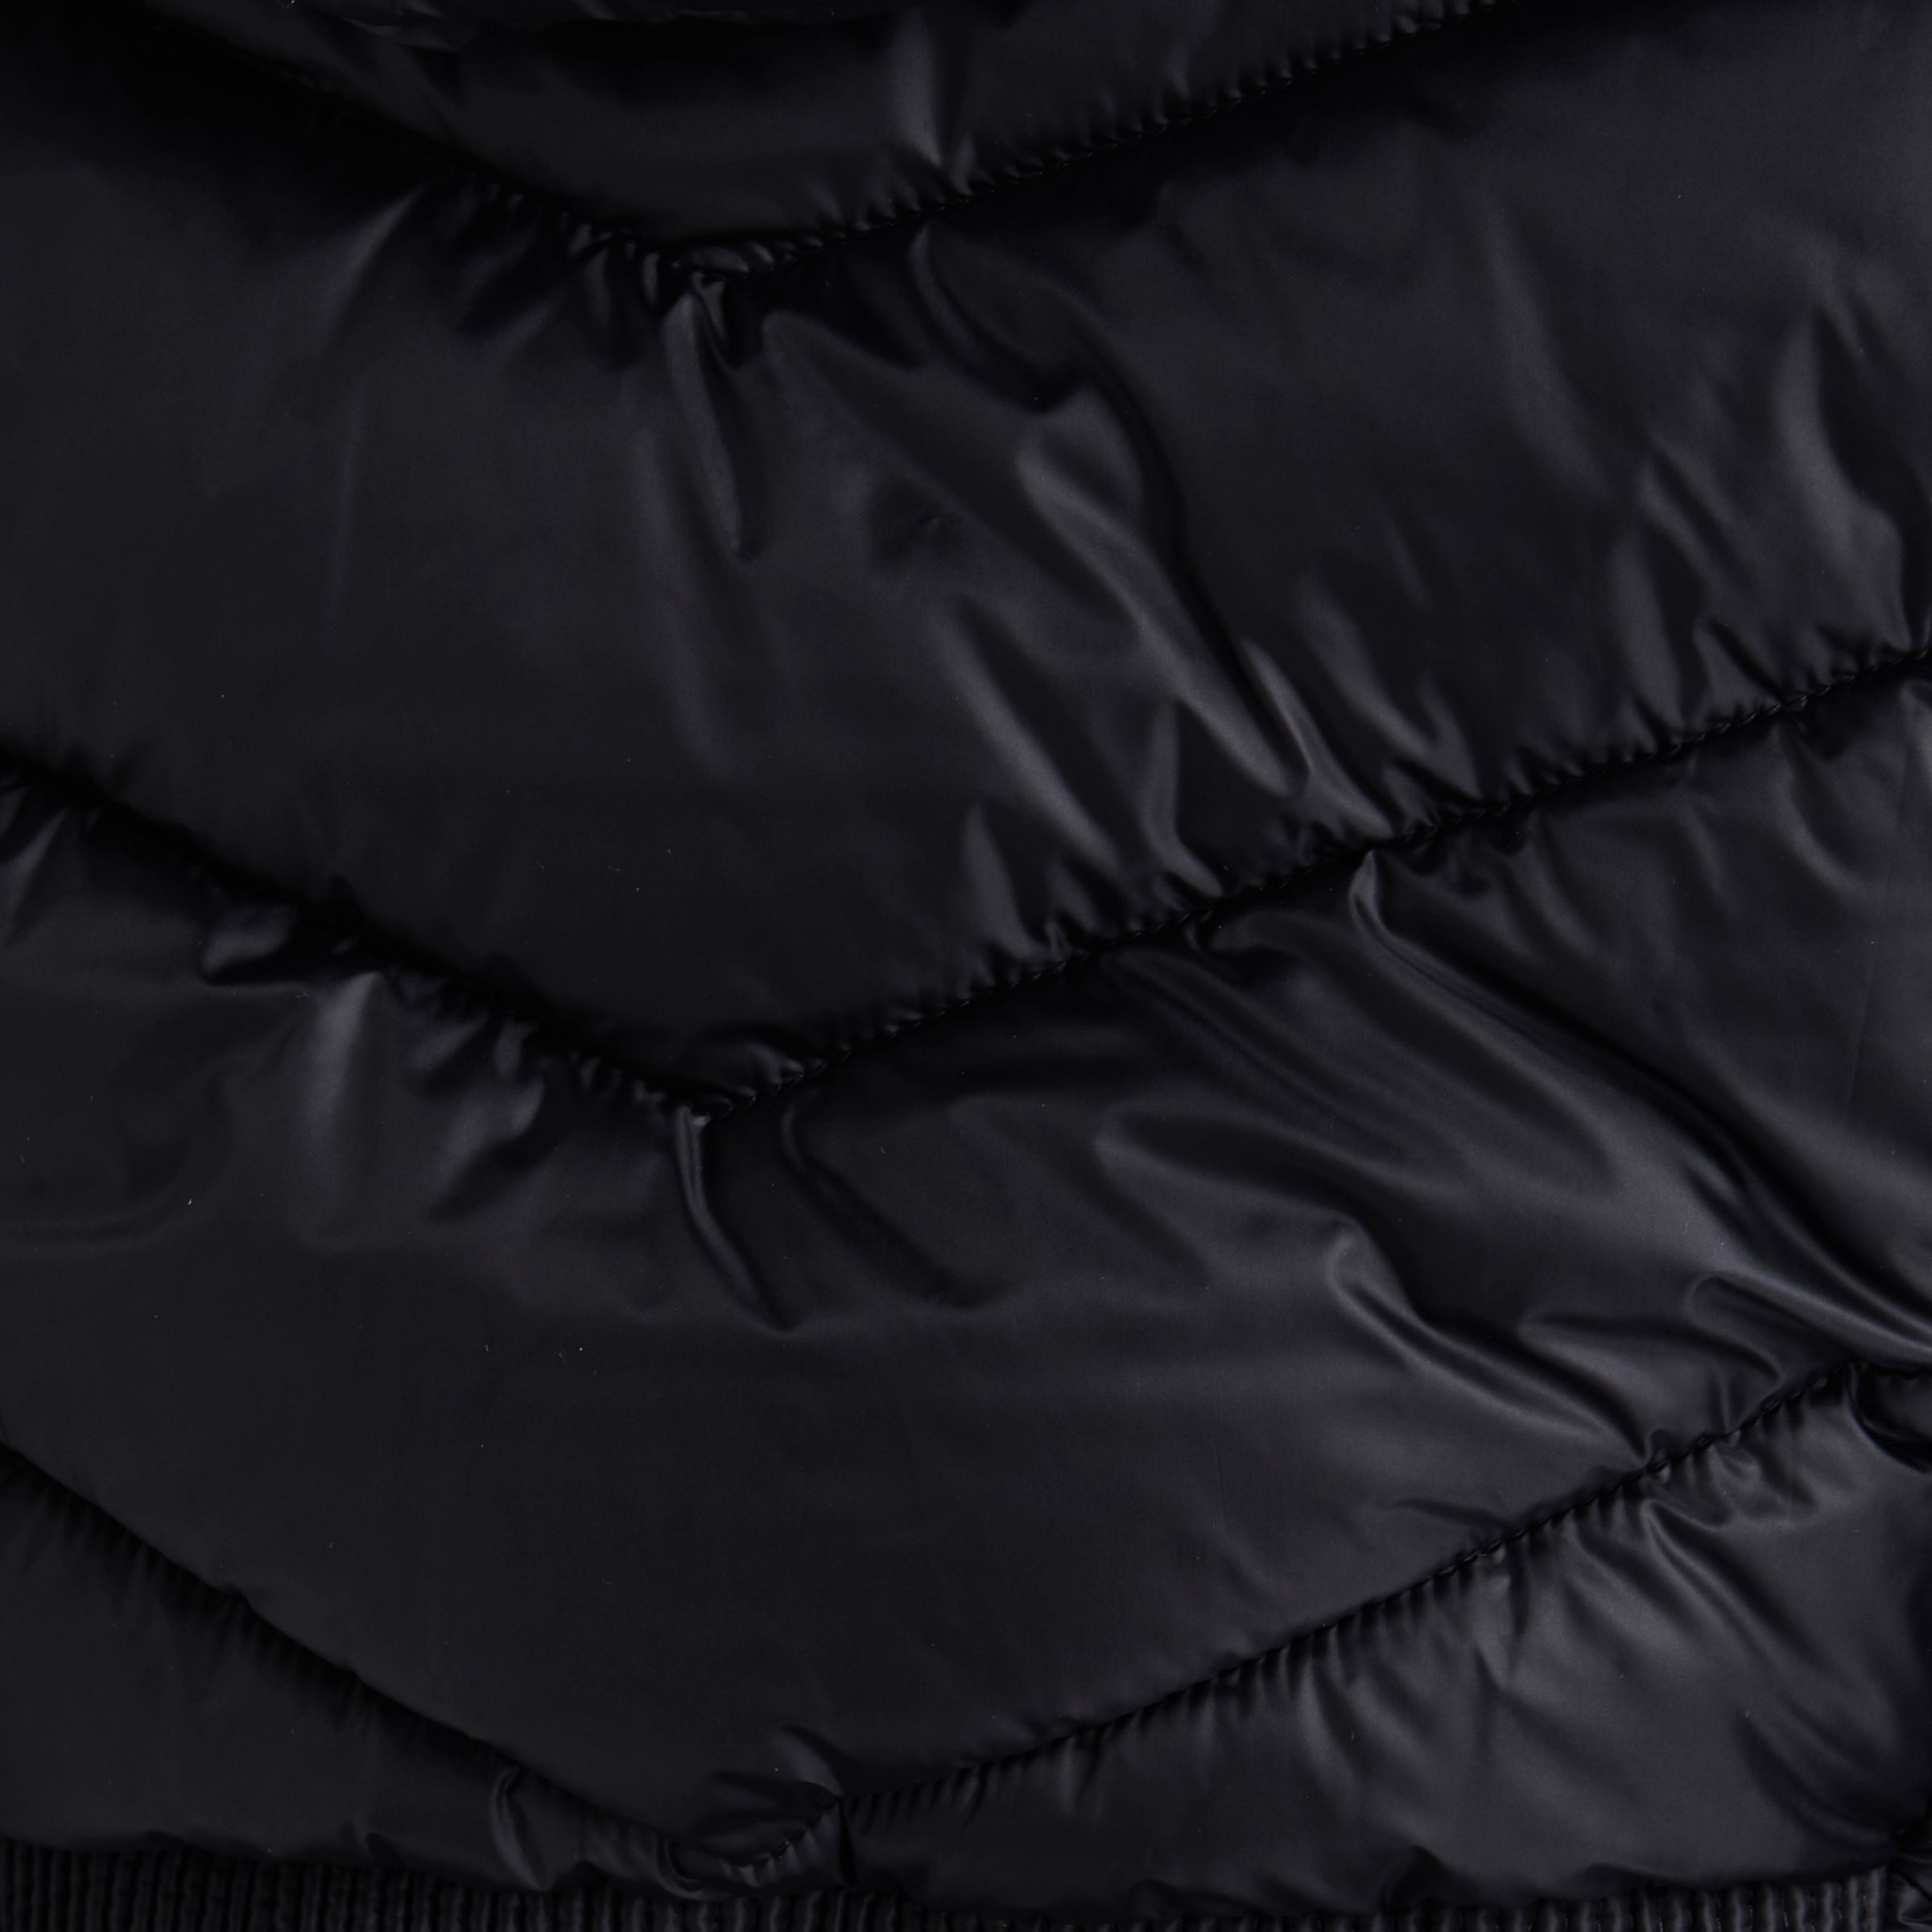 barbour turbo quilted jacket